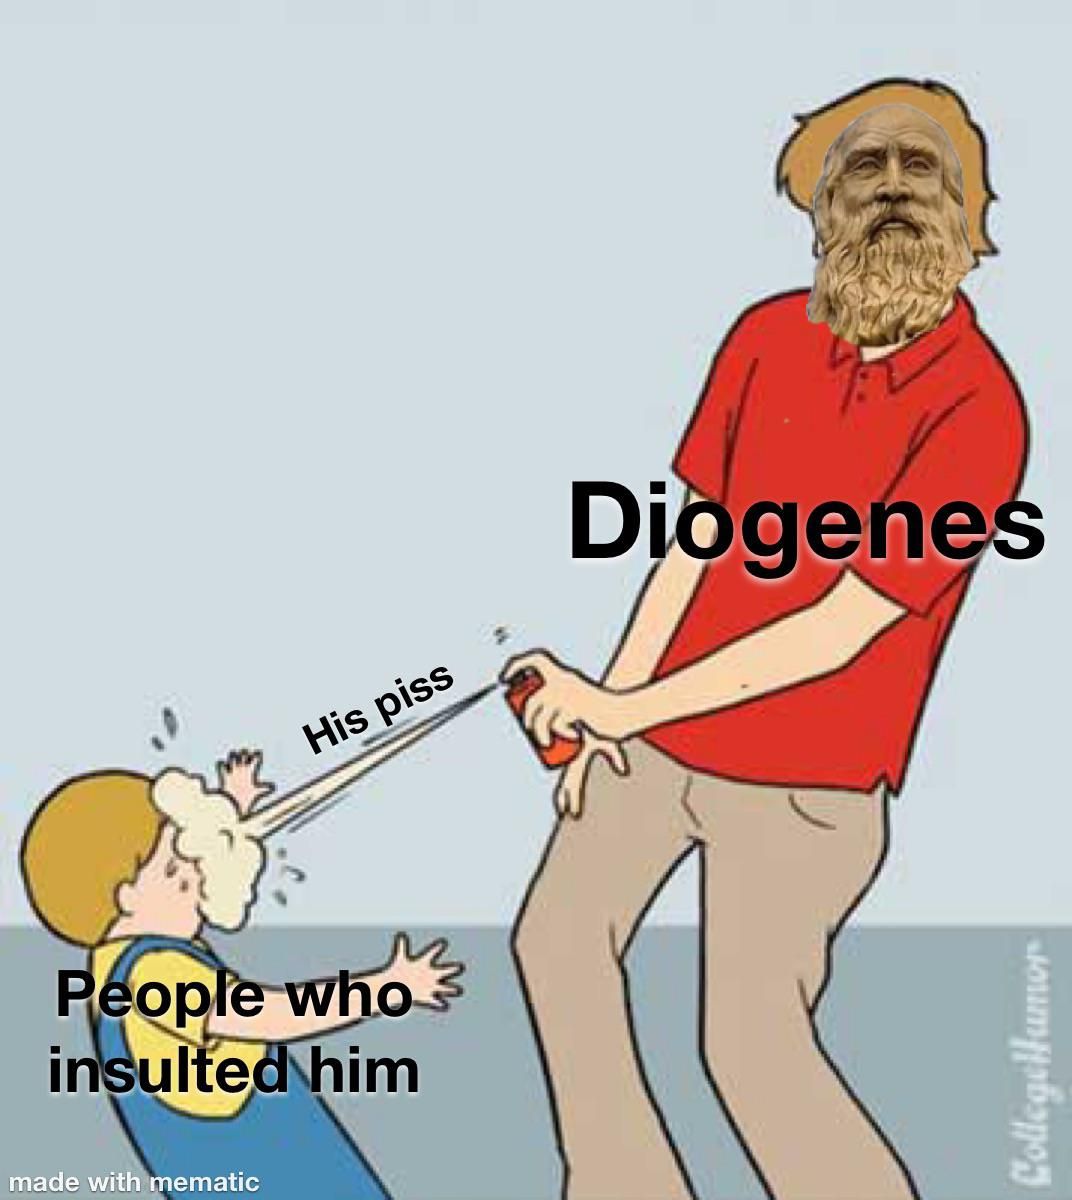 Diogenes was just expressing his anger…